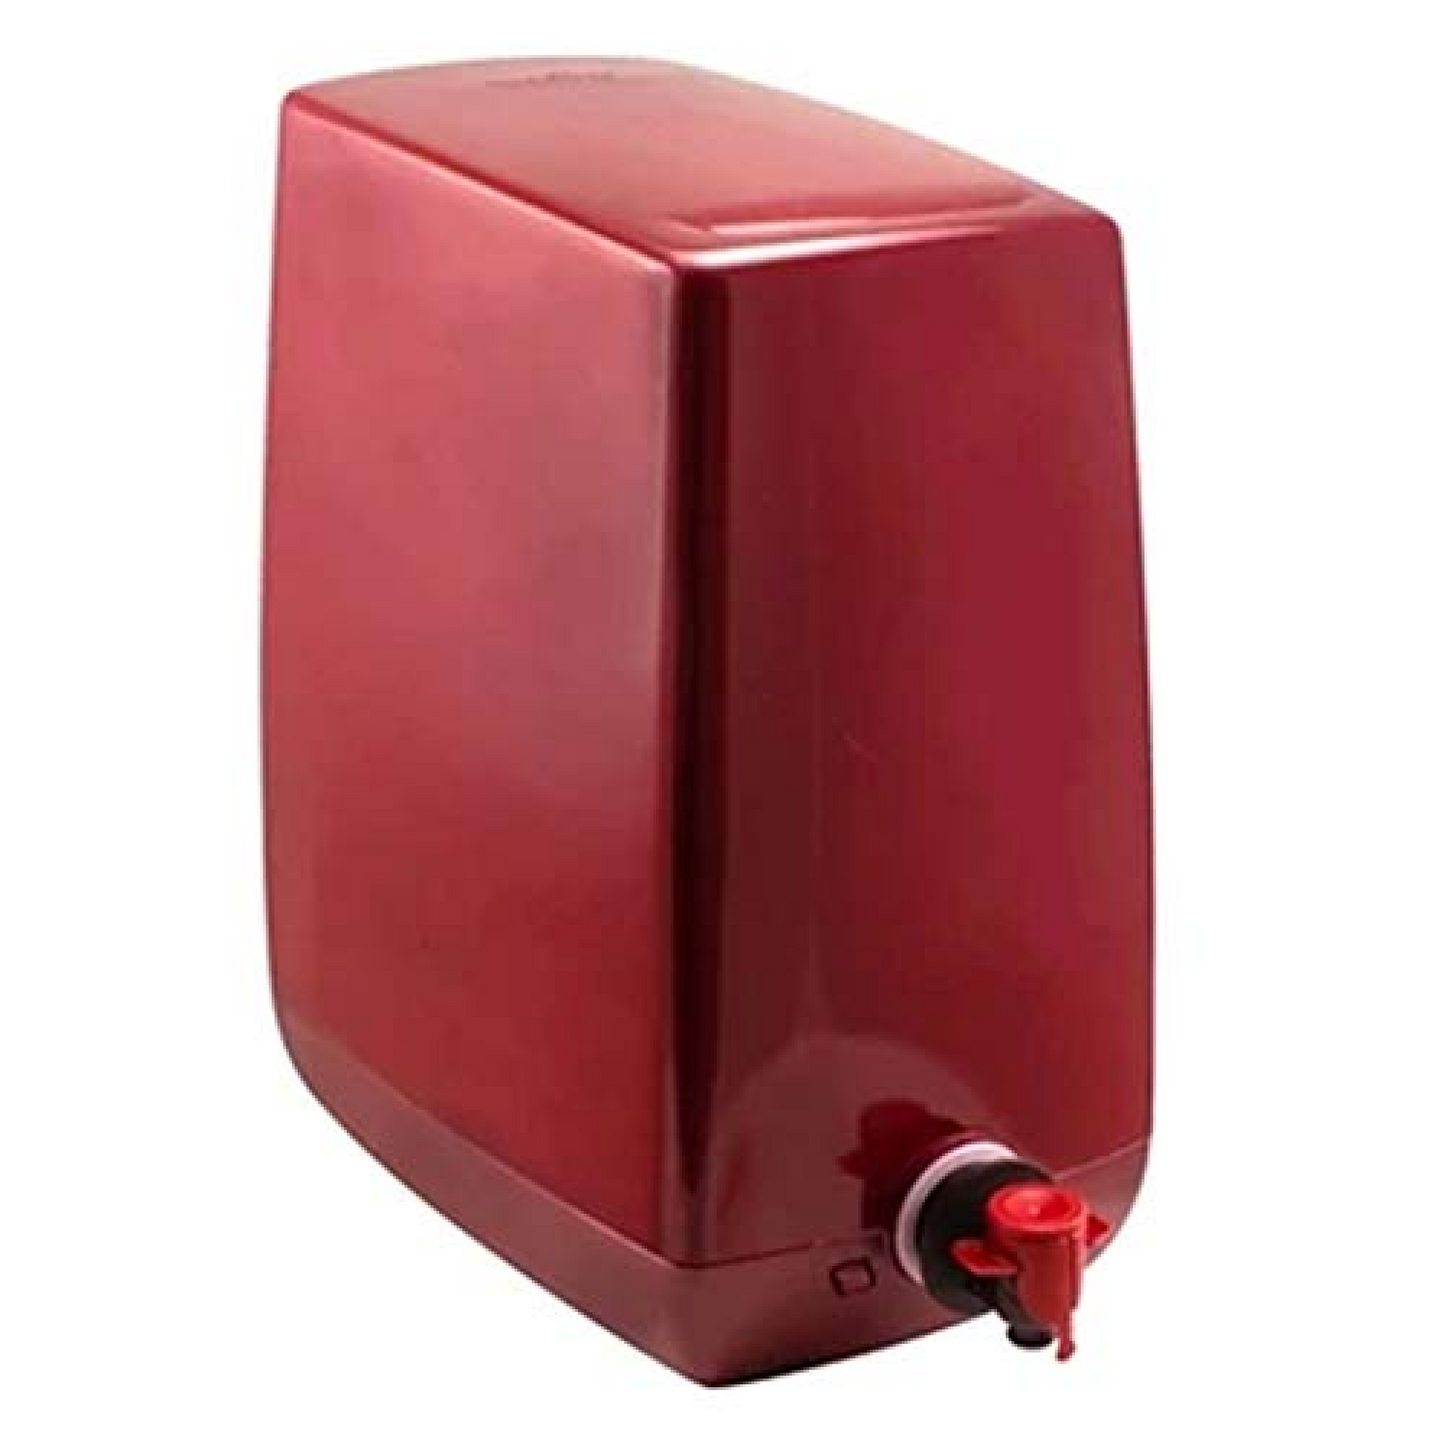 aPour Wine Chiller Bag Dispensing System Replaces Wine In box. Decorative Box Wine Dispenser Cocktail Beverage Dispenser Wine Storage Holder for Kitchen Bar Countertop Fridge Wine Party